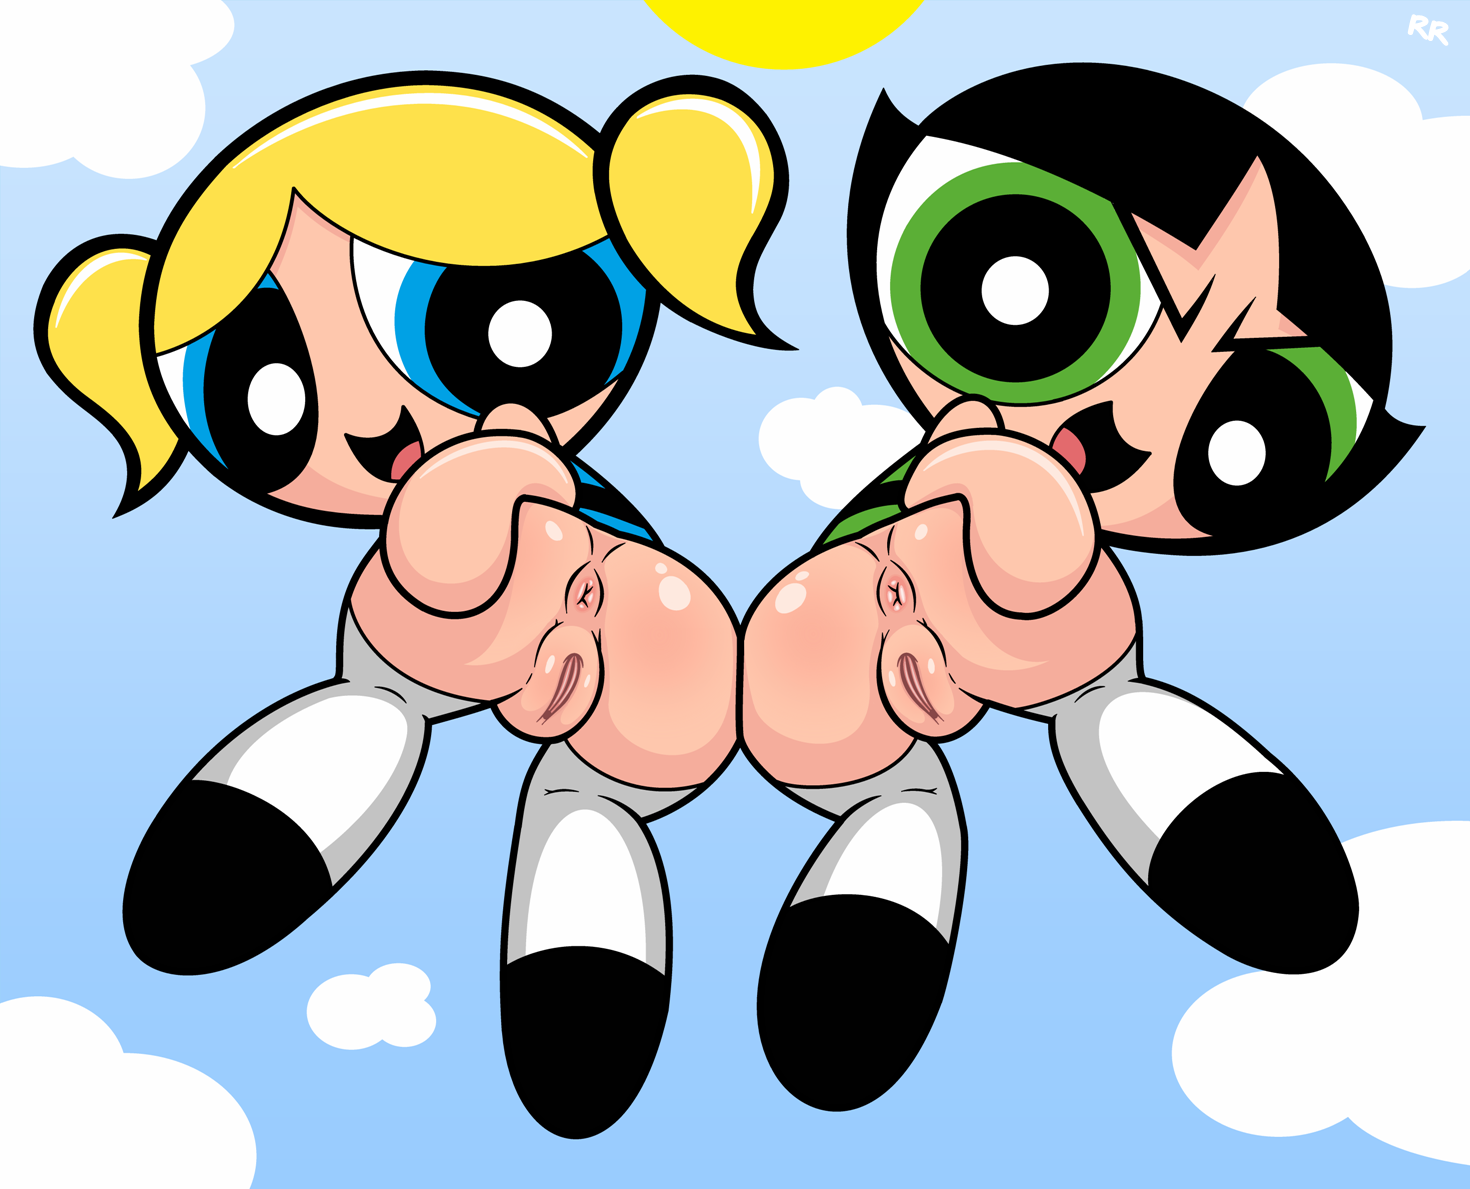 Interstate recommendet sexy The powerpuff nude girls